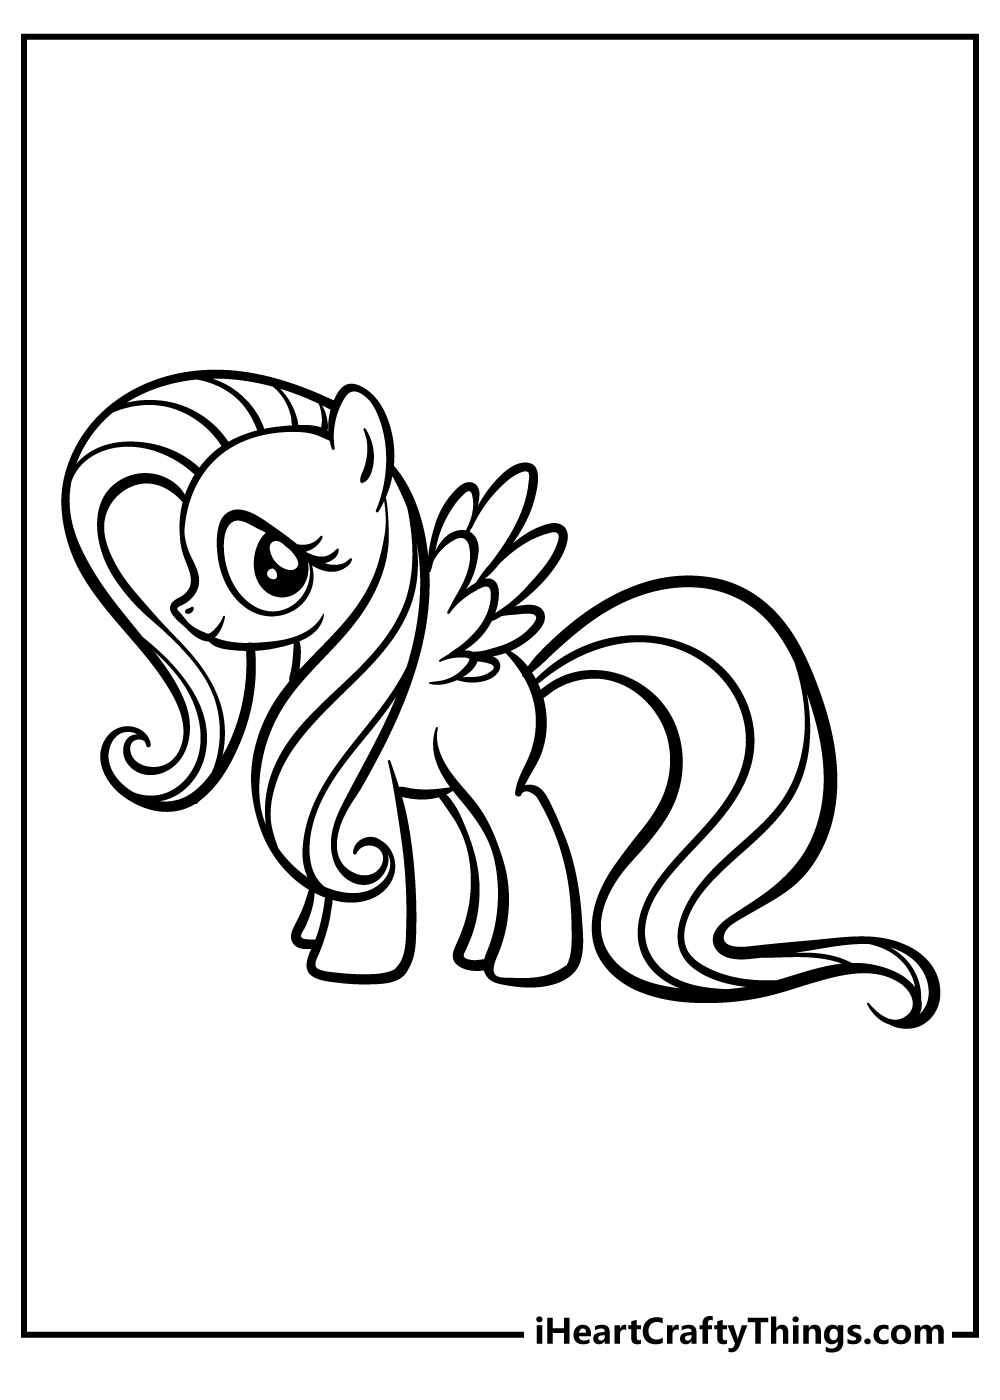 Rainbow Dash Coloring Sheet for children free download